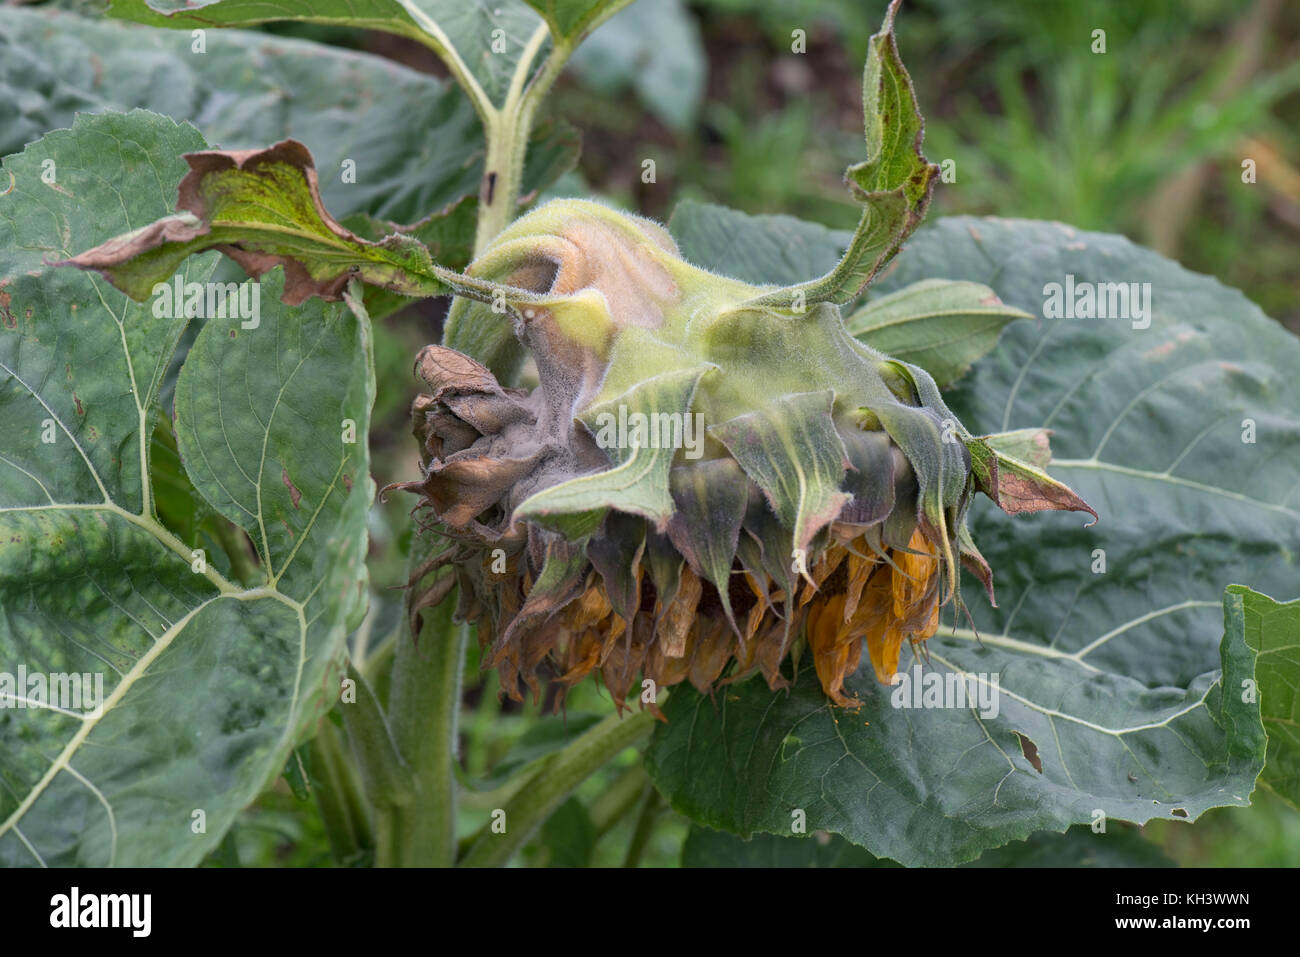 Grey mould, Botrytis cinerea, on a large sunflower flower as it begins to go to seed Stock Photo